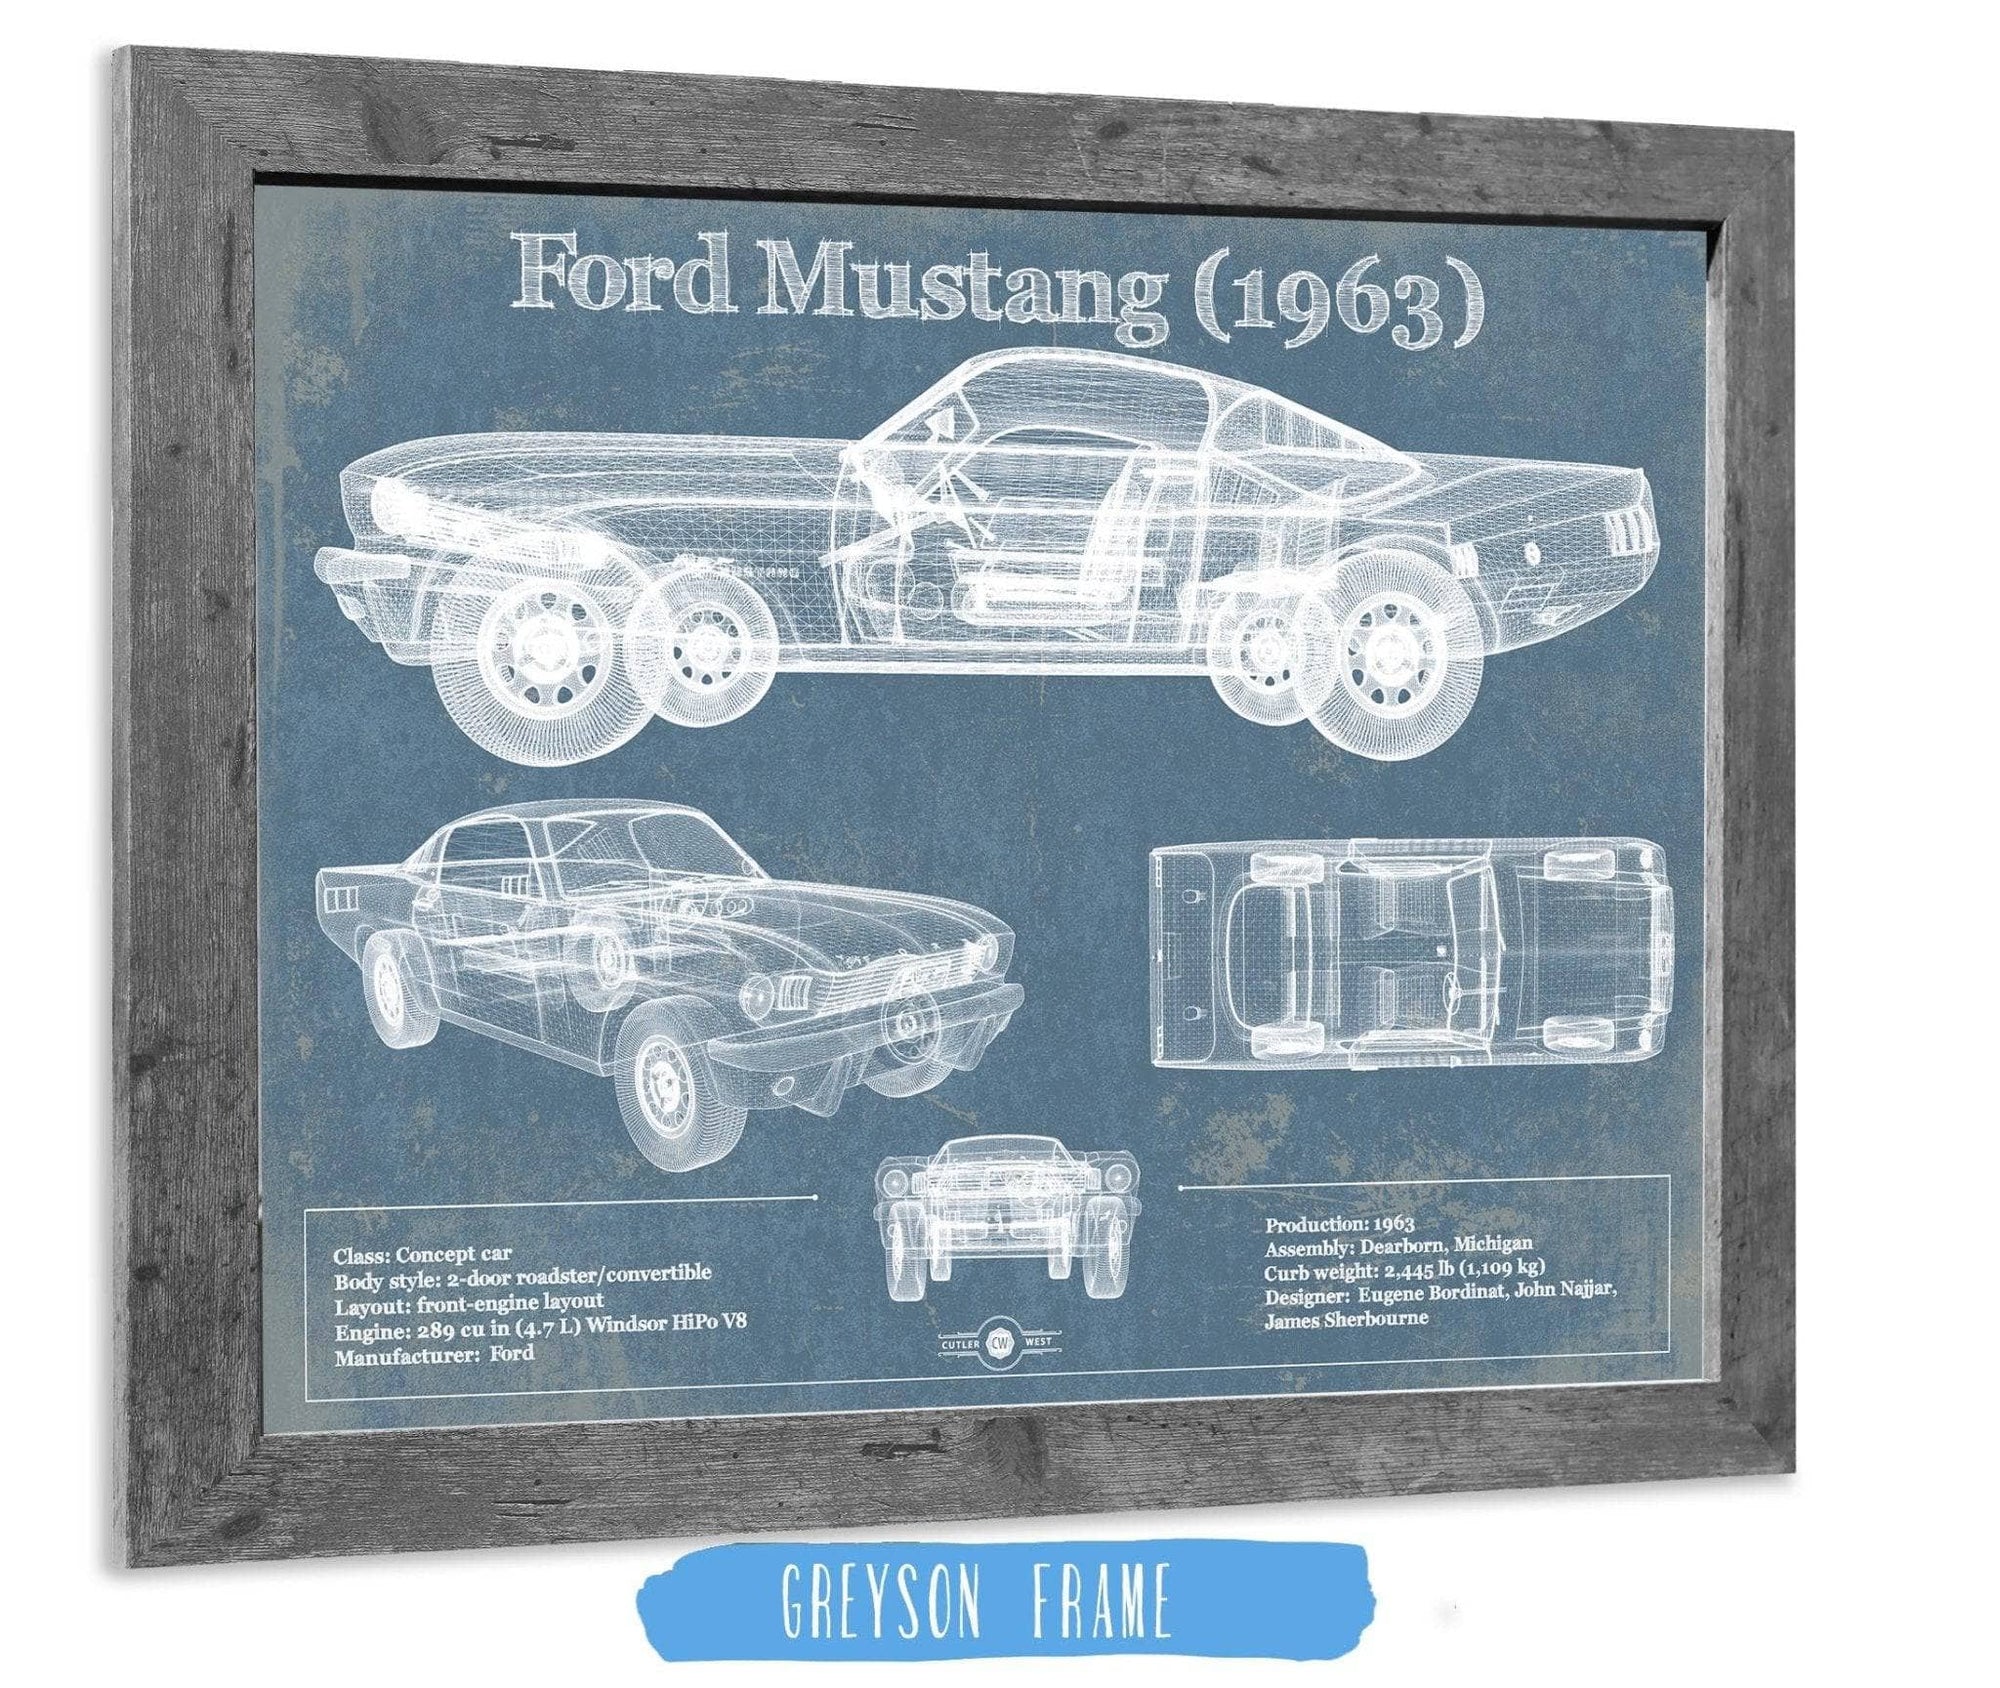 Cutler West Ford Collection 14" x 11" / Greyson Frame Ford Mustang 1963 Original Blueprint Art 870268486-TOP